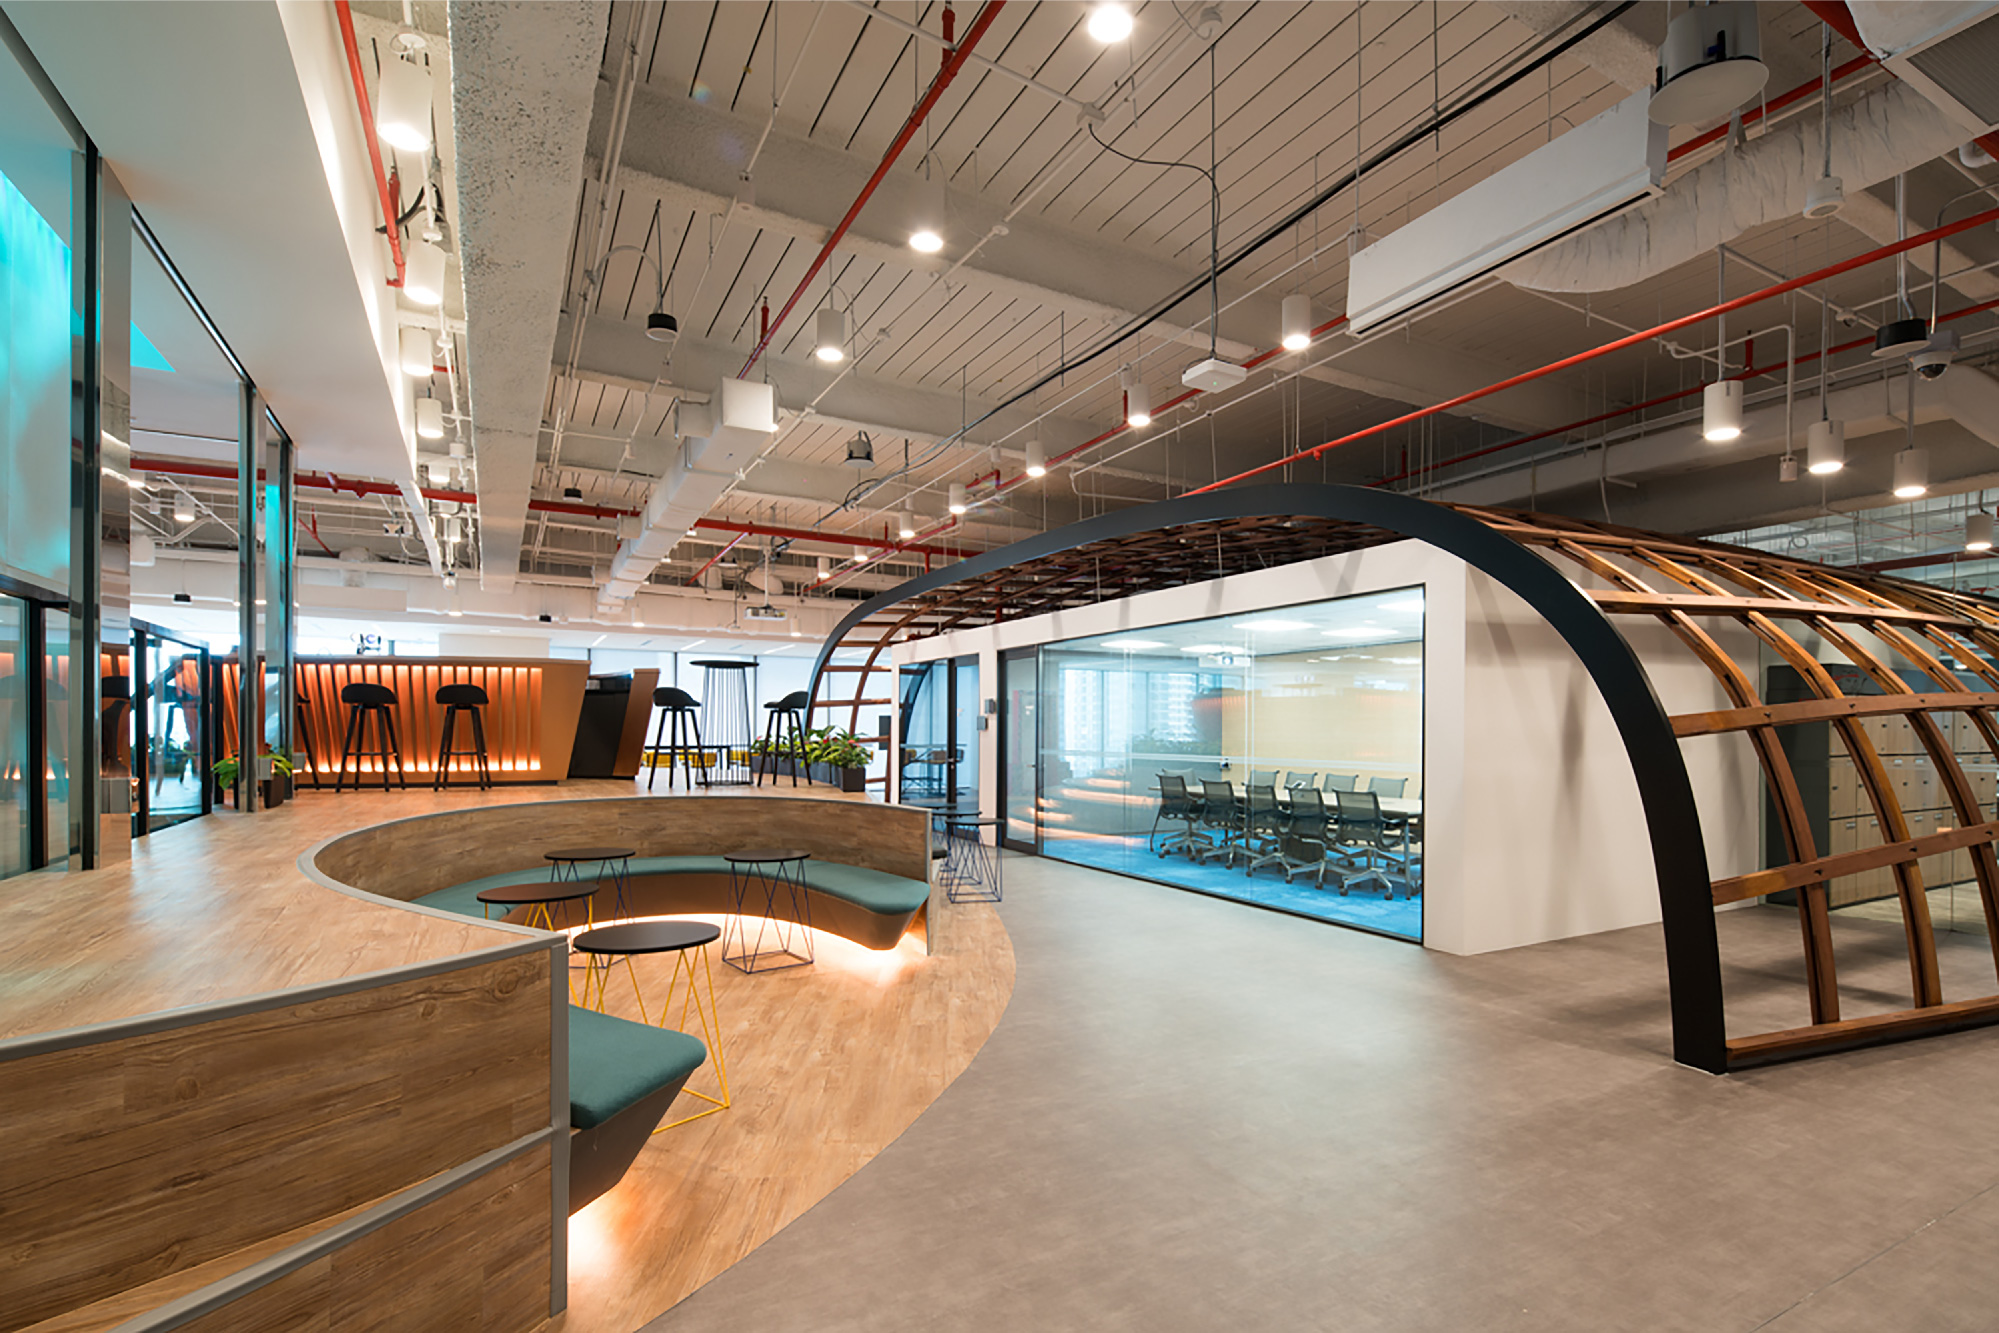 Prudential office in Singapore showcasing an agile and inclusive workspace design